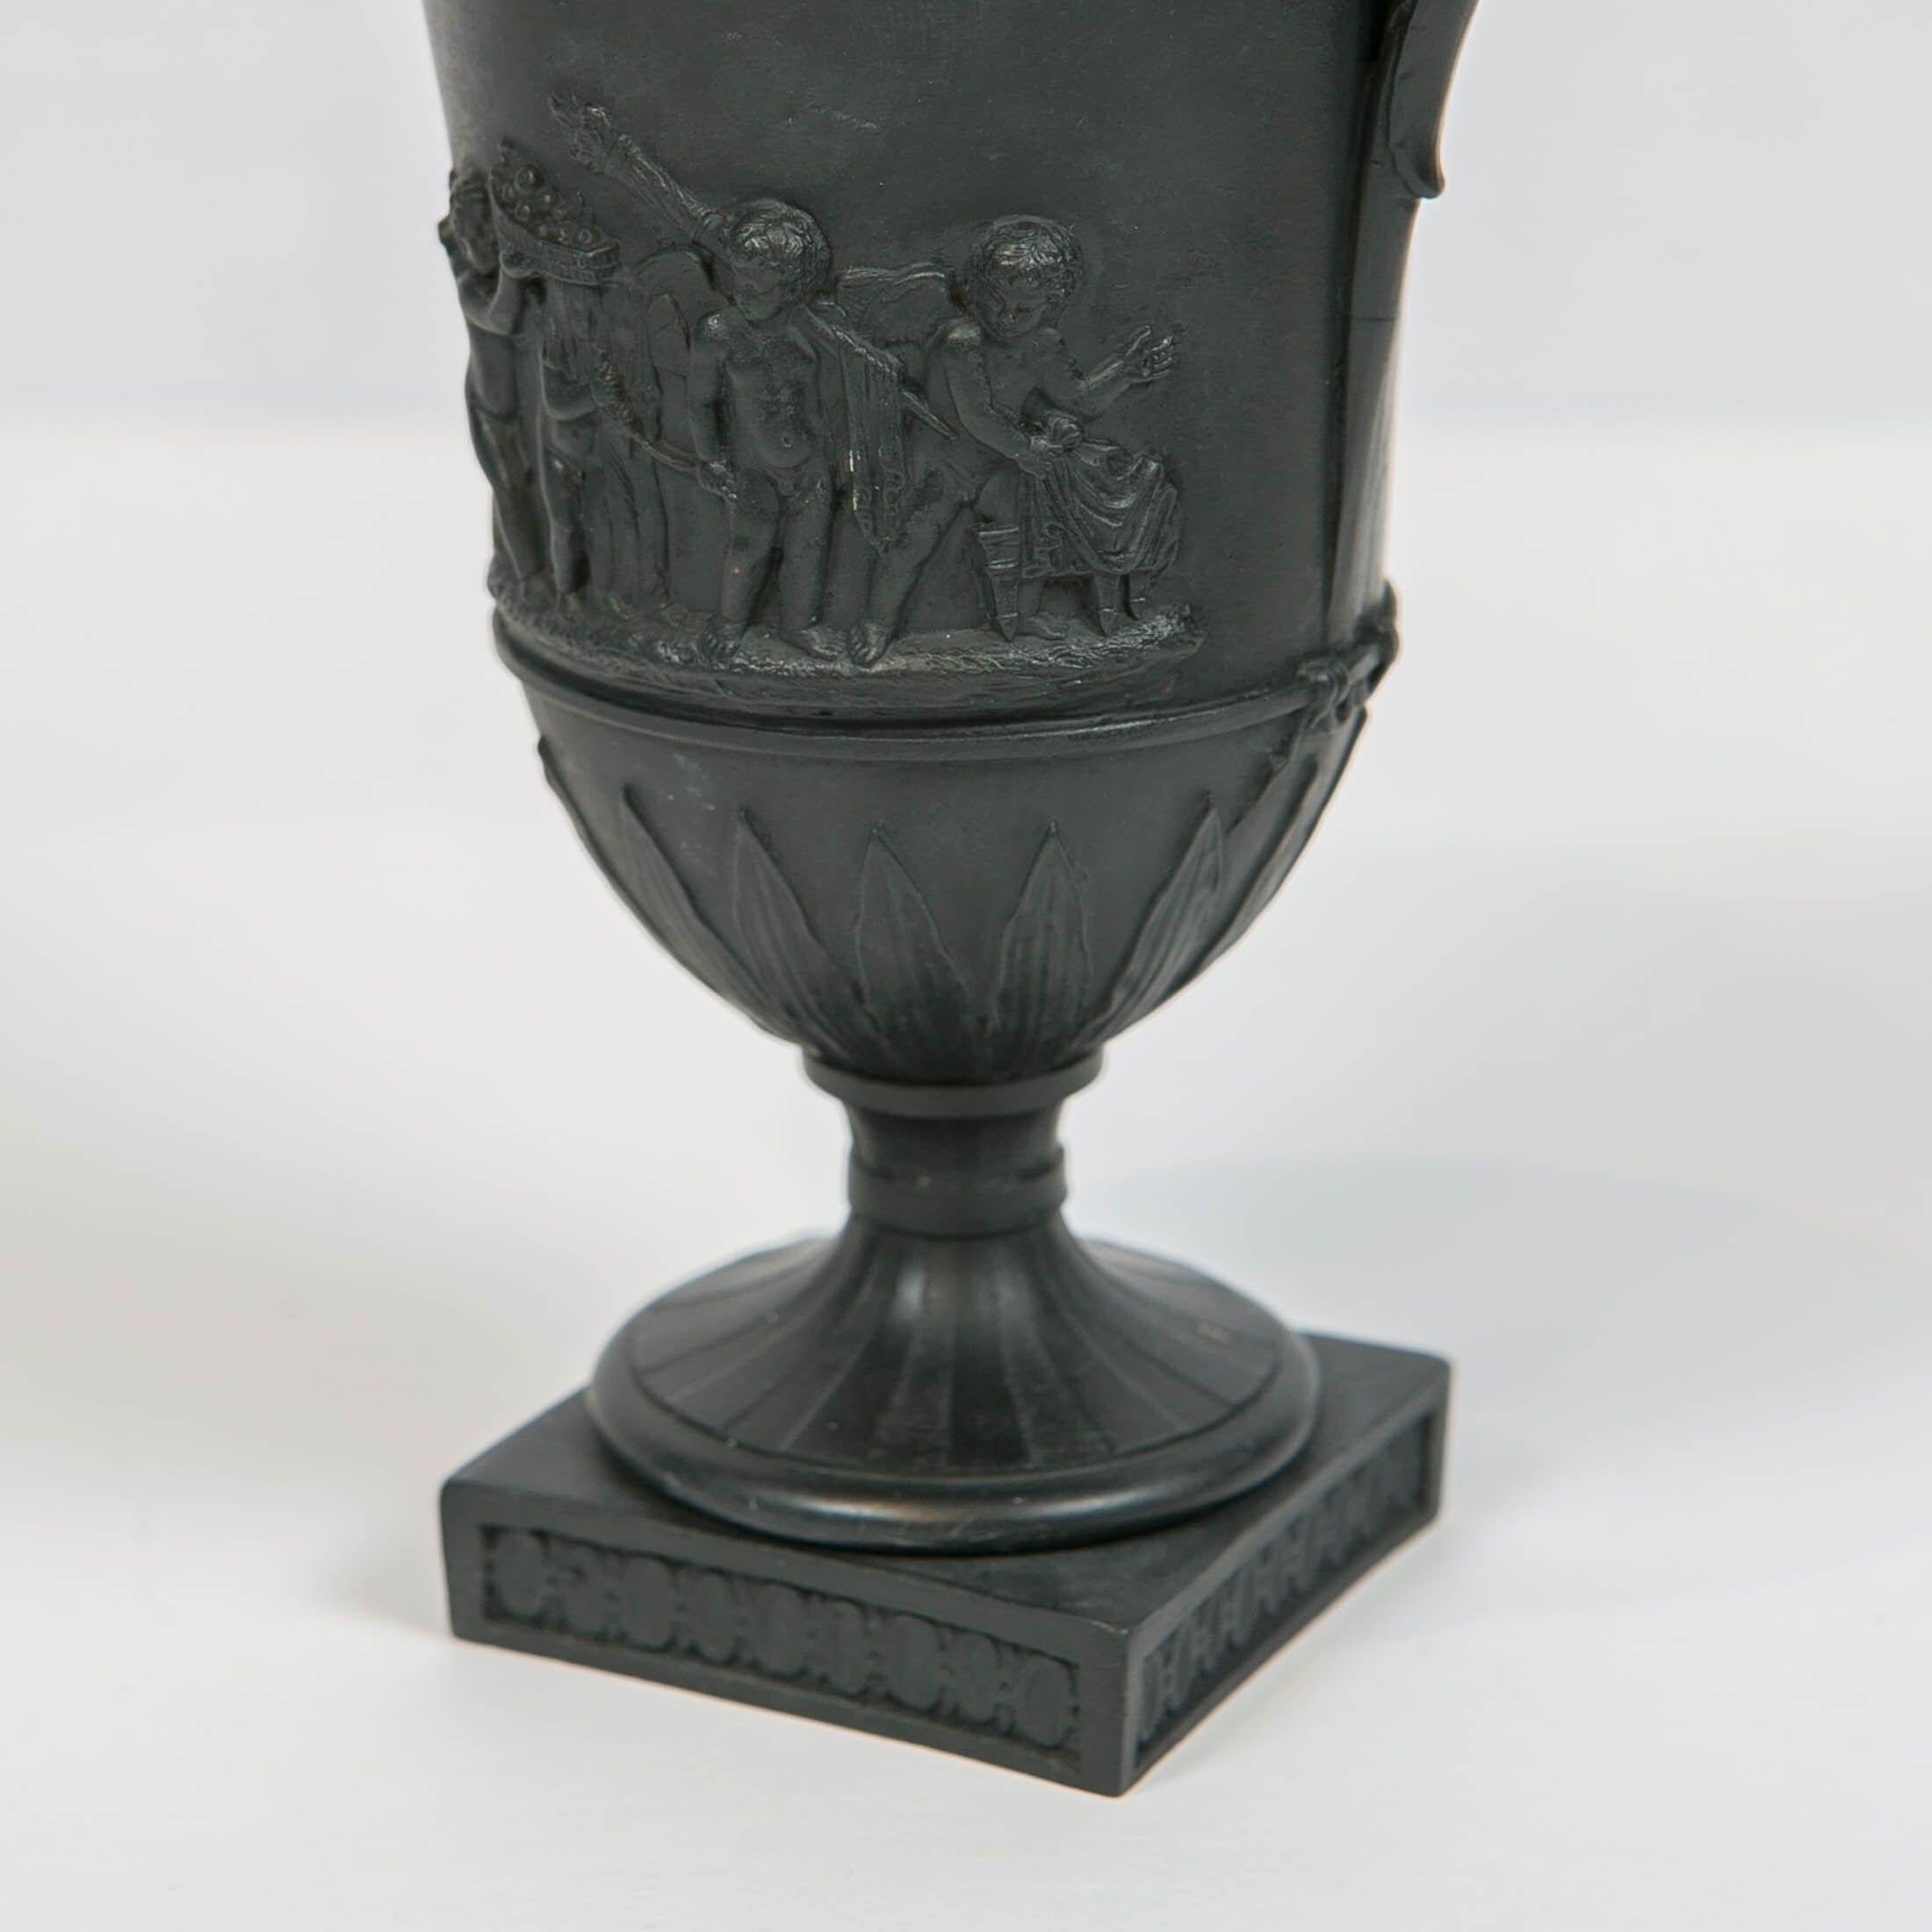 We are pleased to offer this pair of Wedgwood black basalt double handled vases decorated with neoclassical figures. Made in England circa 1800, these covered vases are molded in an ancient Greco-Roman style. Decorated at the top with machine turned